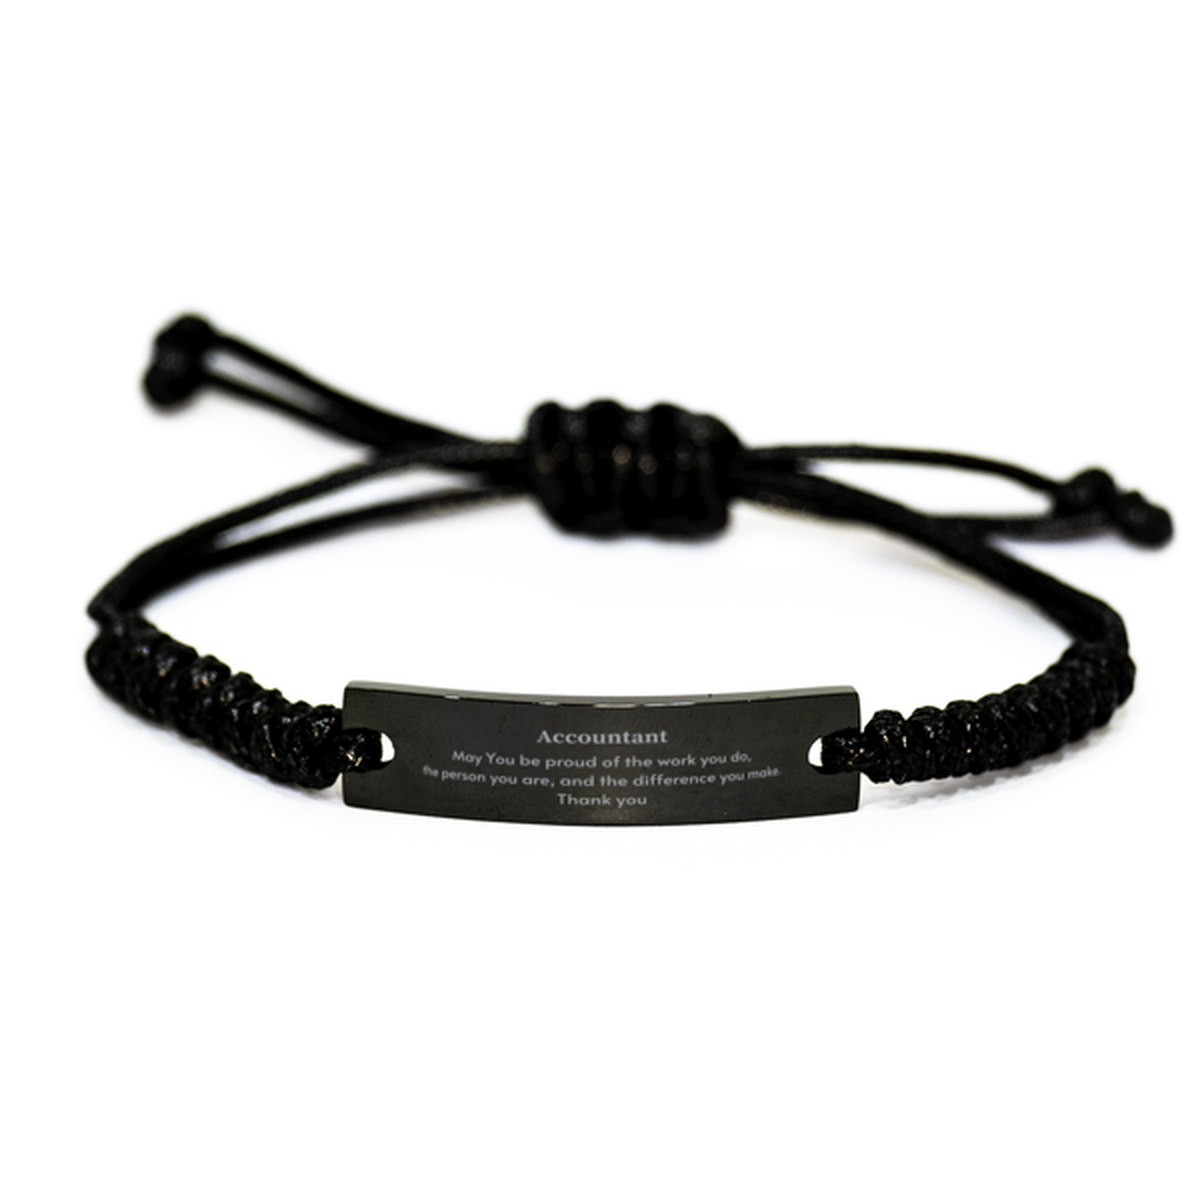 Heartwarming Black Rope Bracelet Retirement Coworkers Gifts for Accountant, Accountant May You be proud of the work you do, the person you are Gifts for Boss Men Women Friends